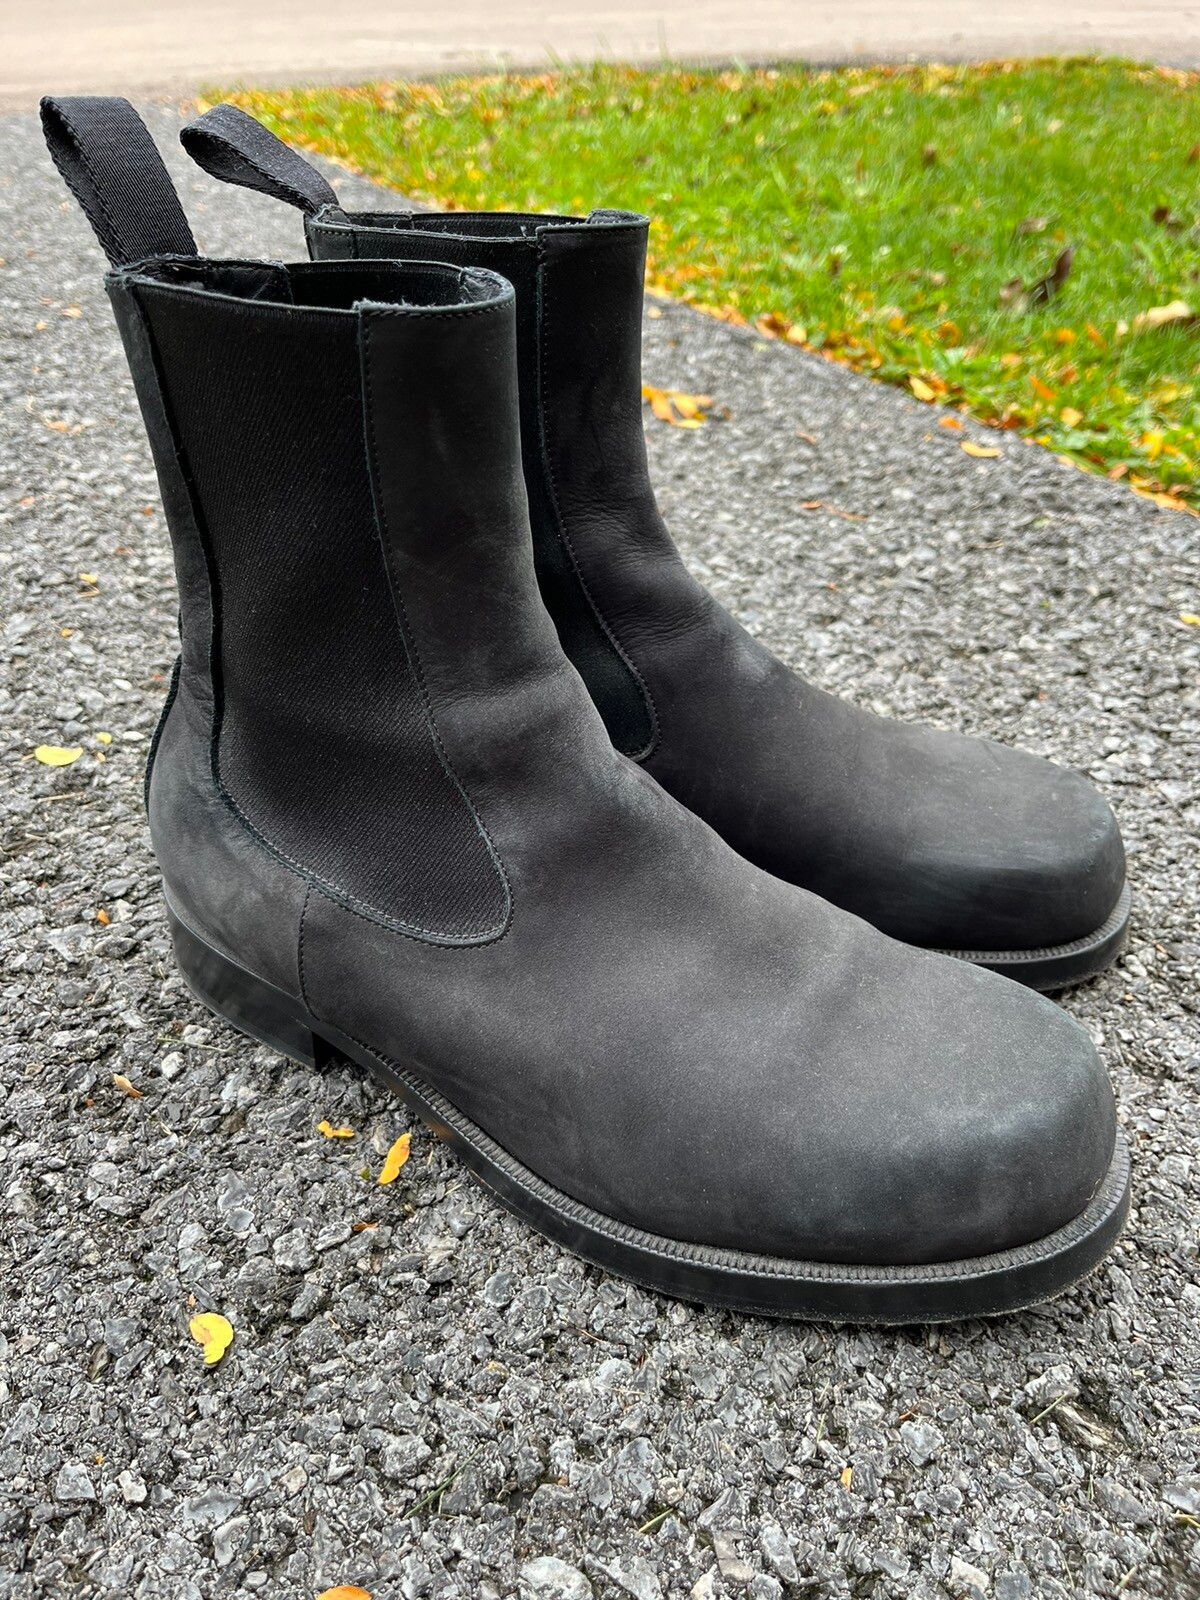 1017 ALYX 9SM Alyx suede Chelsea boots | Grailed